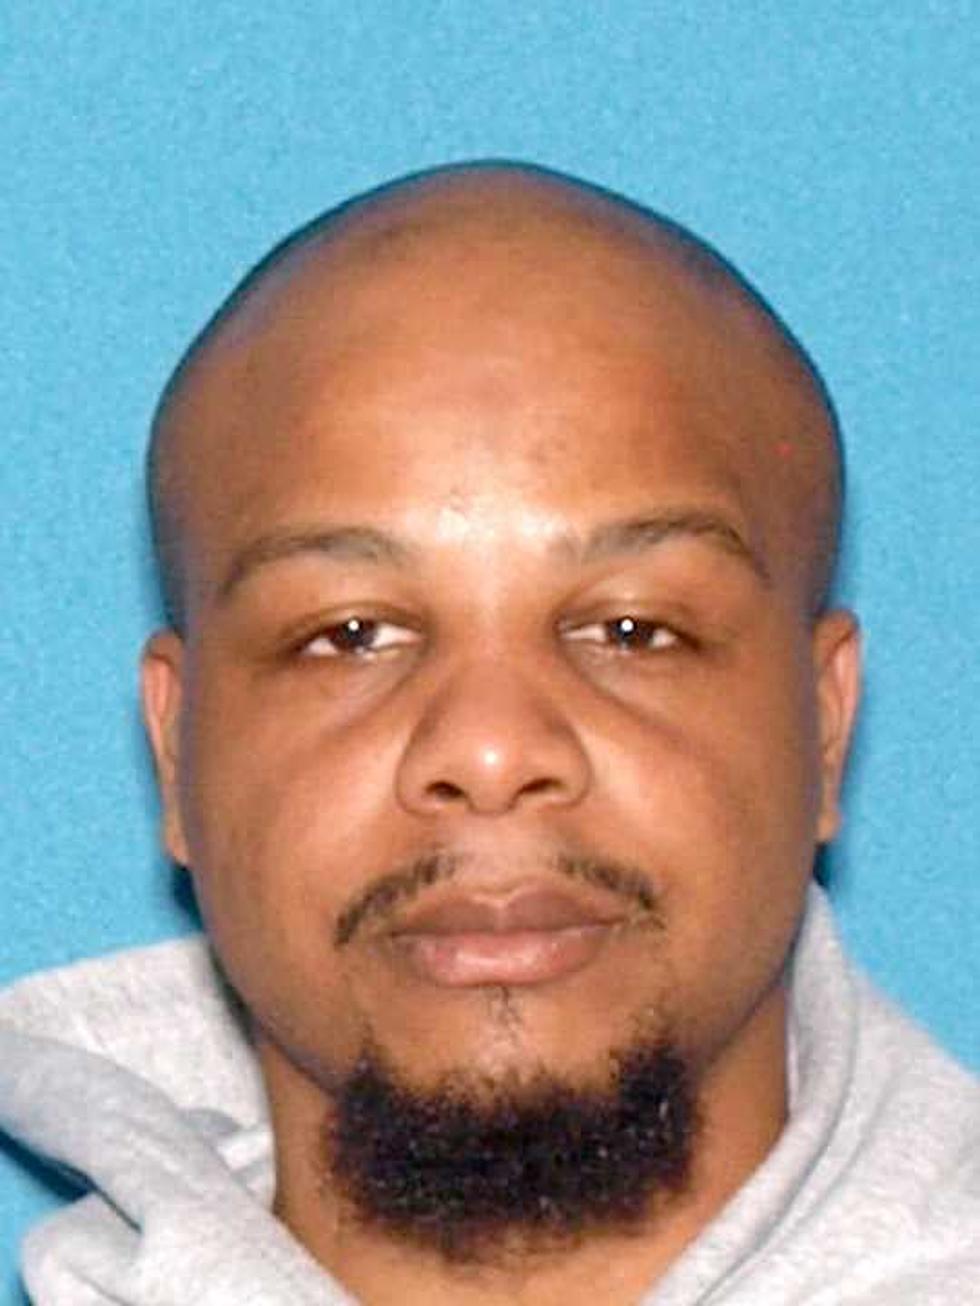 New Jersey man wanted for attempted murder at Toms River hotel is arrested